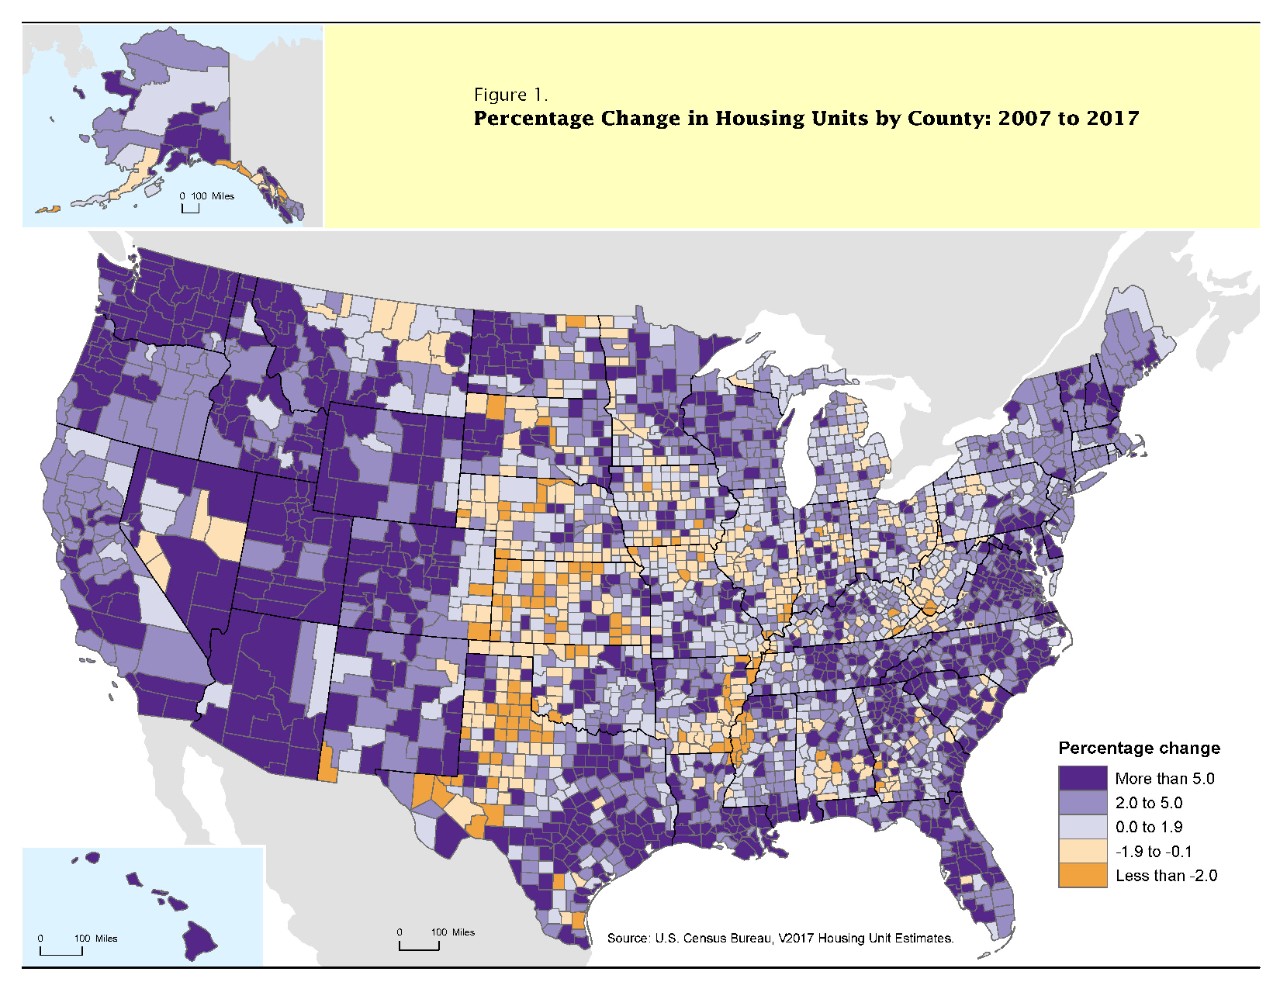 Percentage Change in Housing Units by County: 2007 to 2017